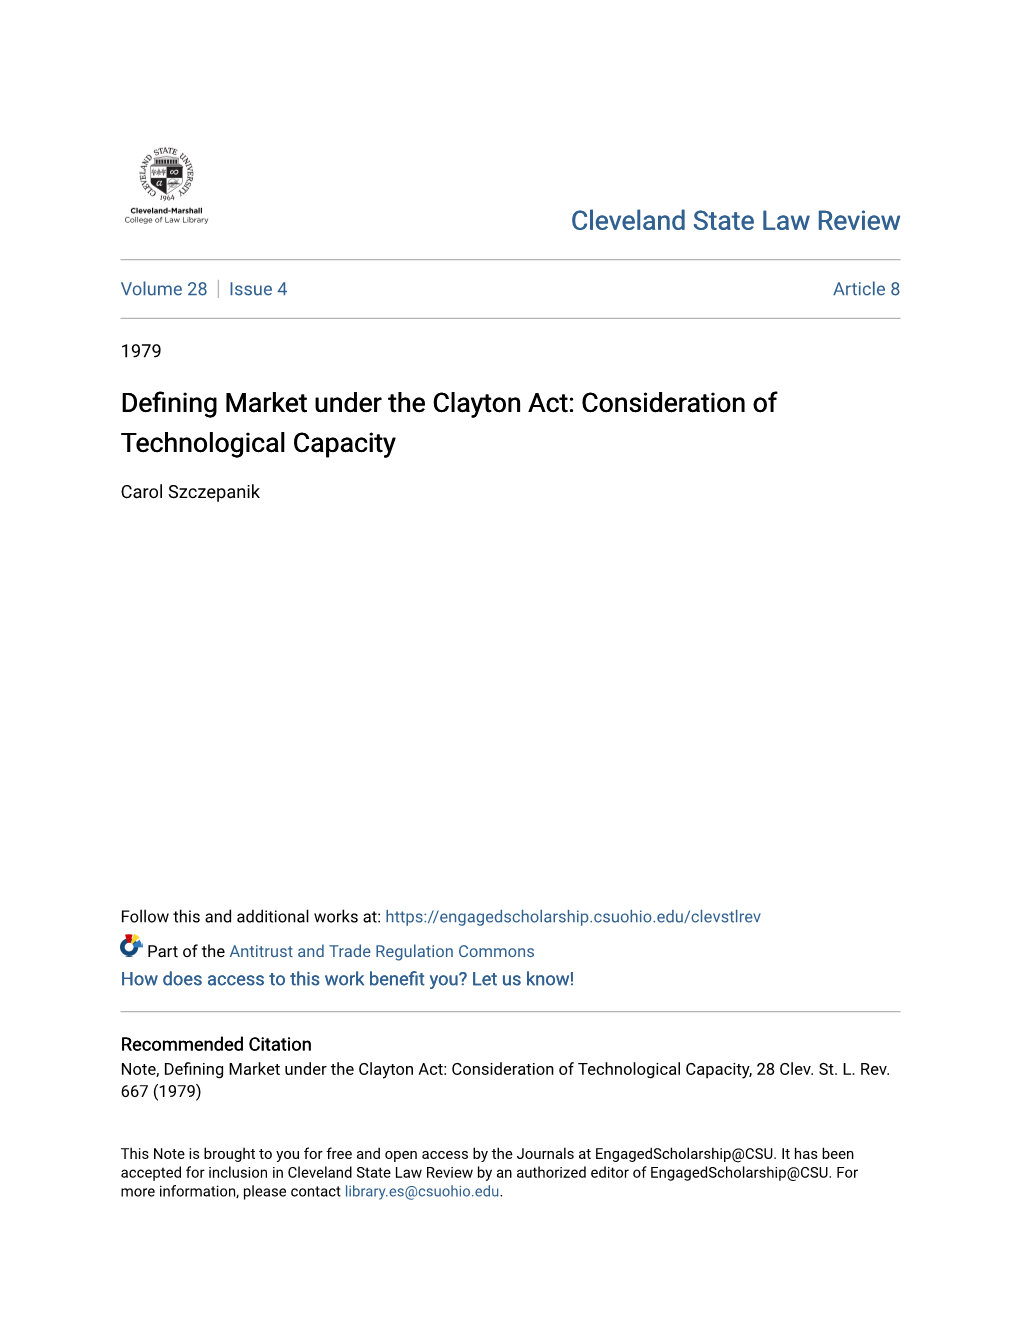 Defining Market Under the Clayton Act: Consideration of Technological Capacity